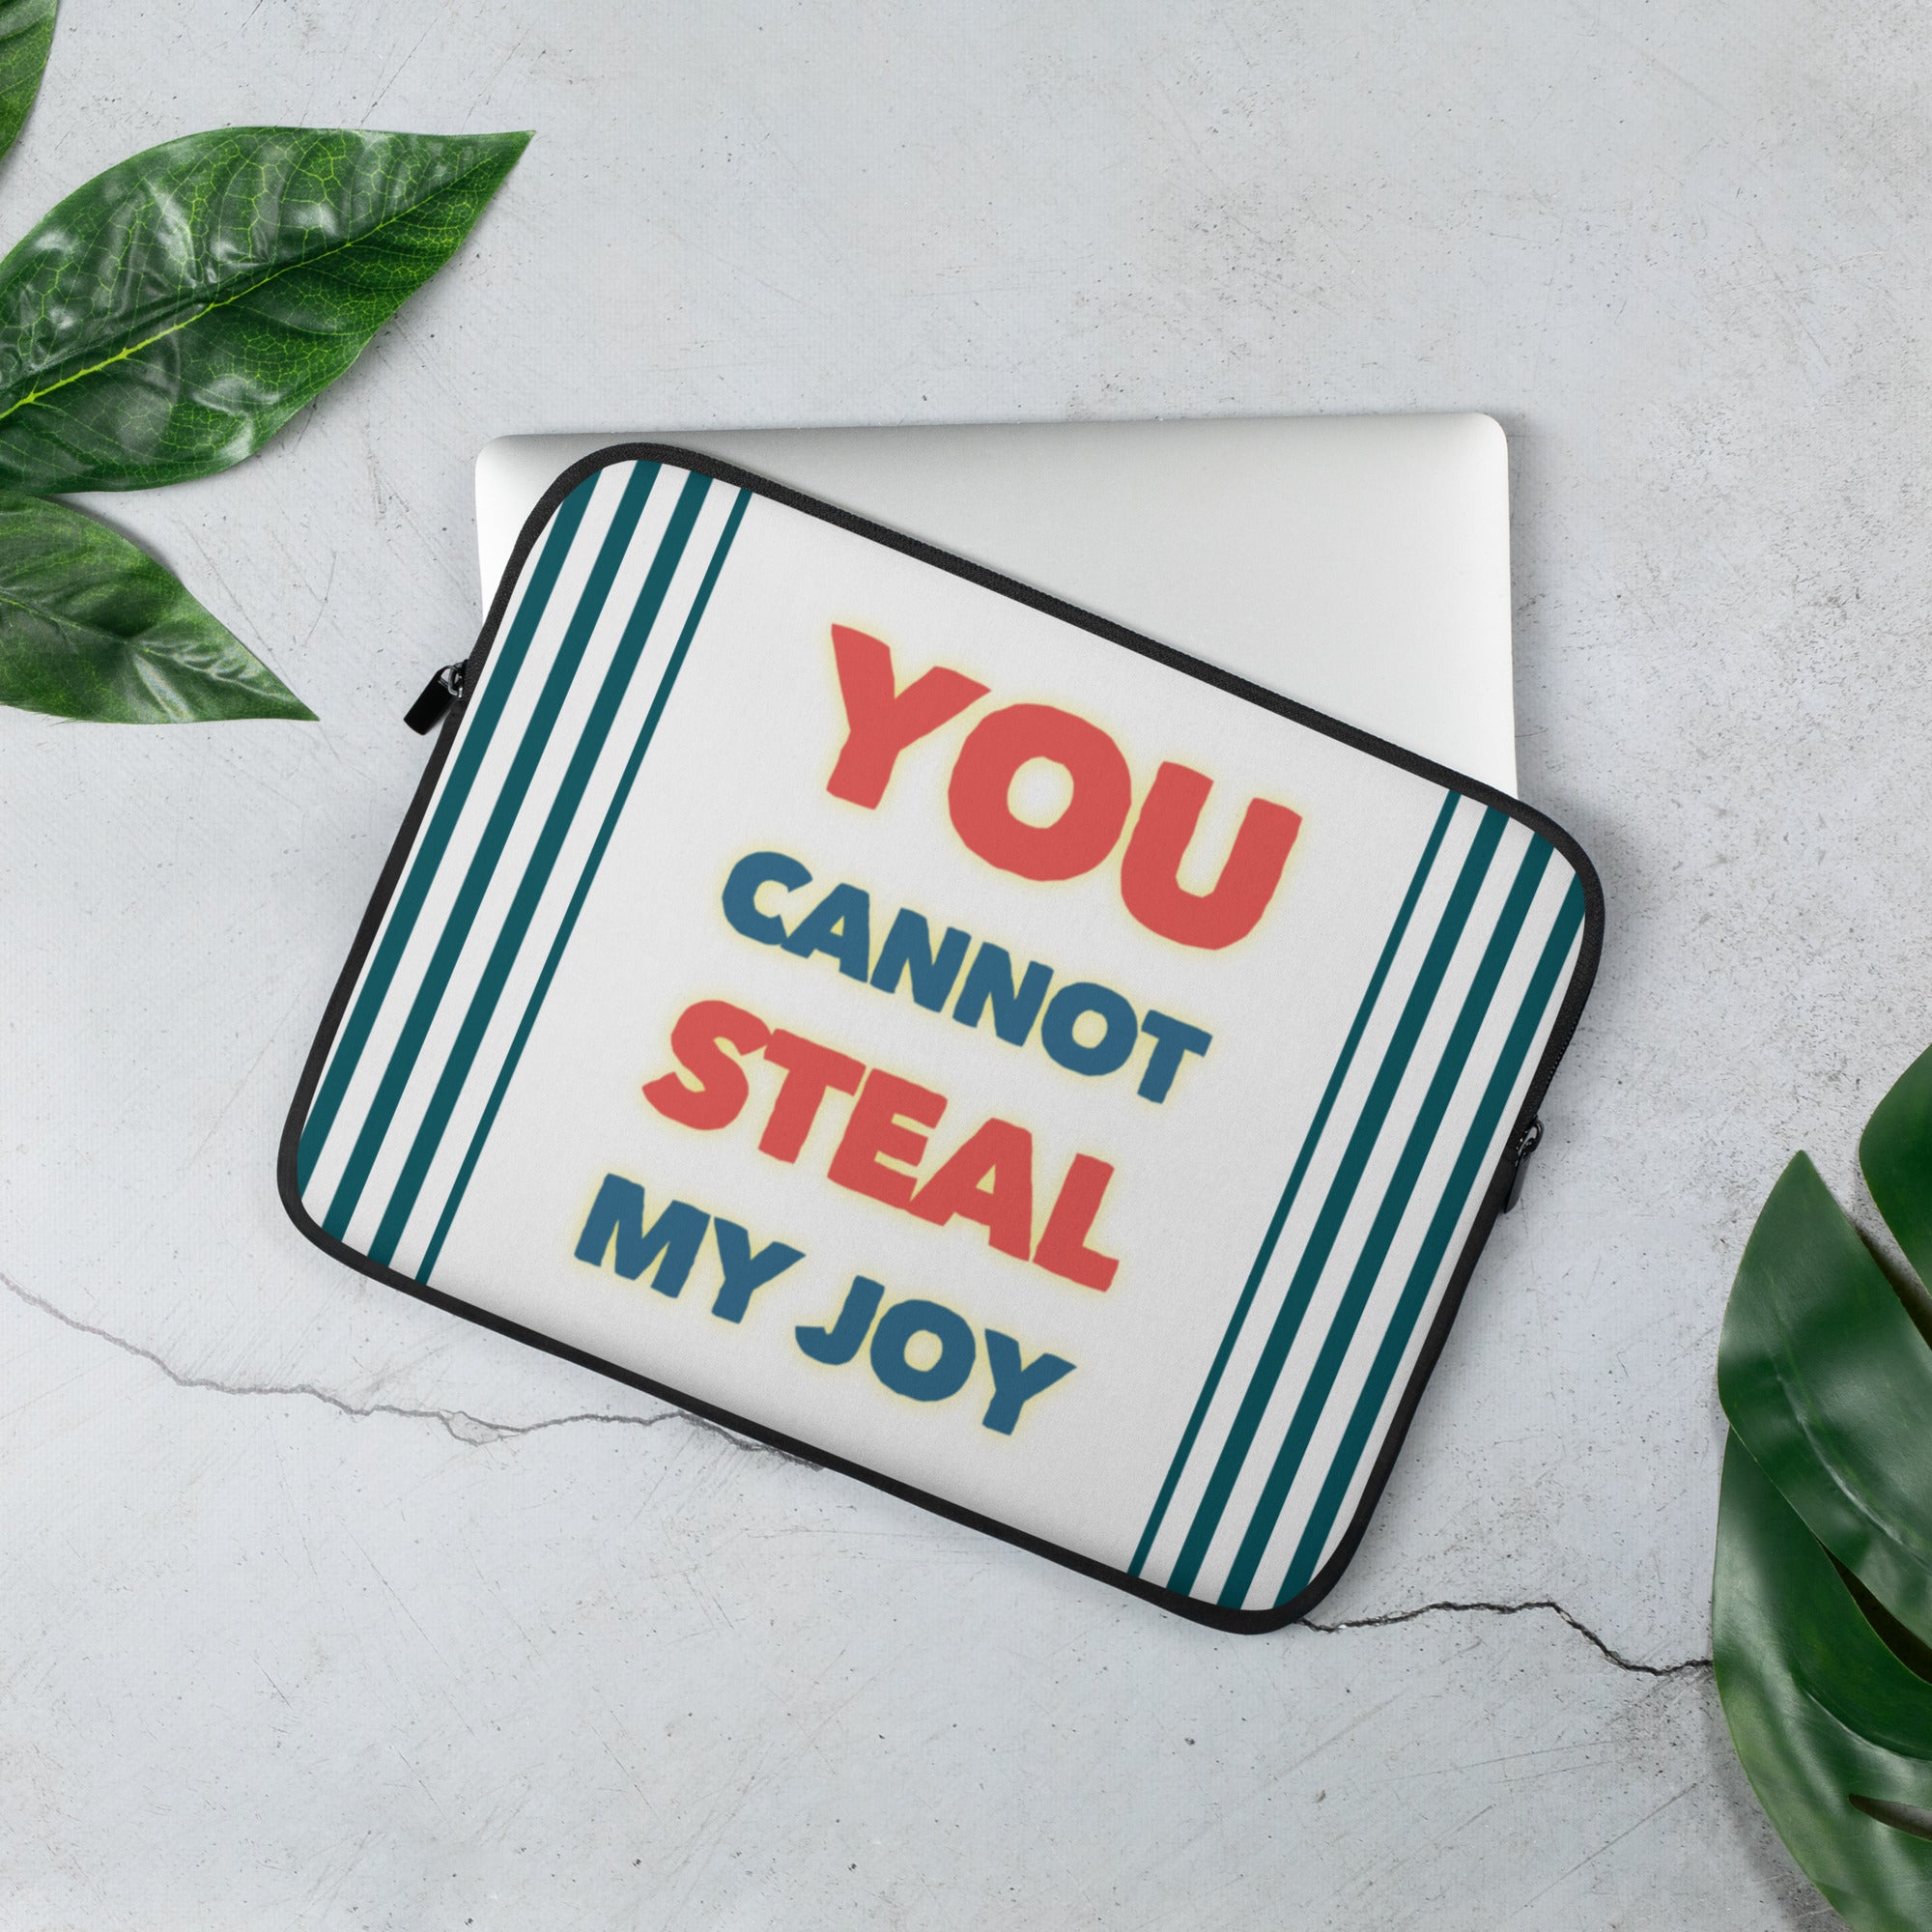 GloWell Designs - Laptop Sleeve - Affirmation Quote - You Cannot Steal My Joy - GloWell Designs